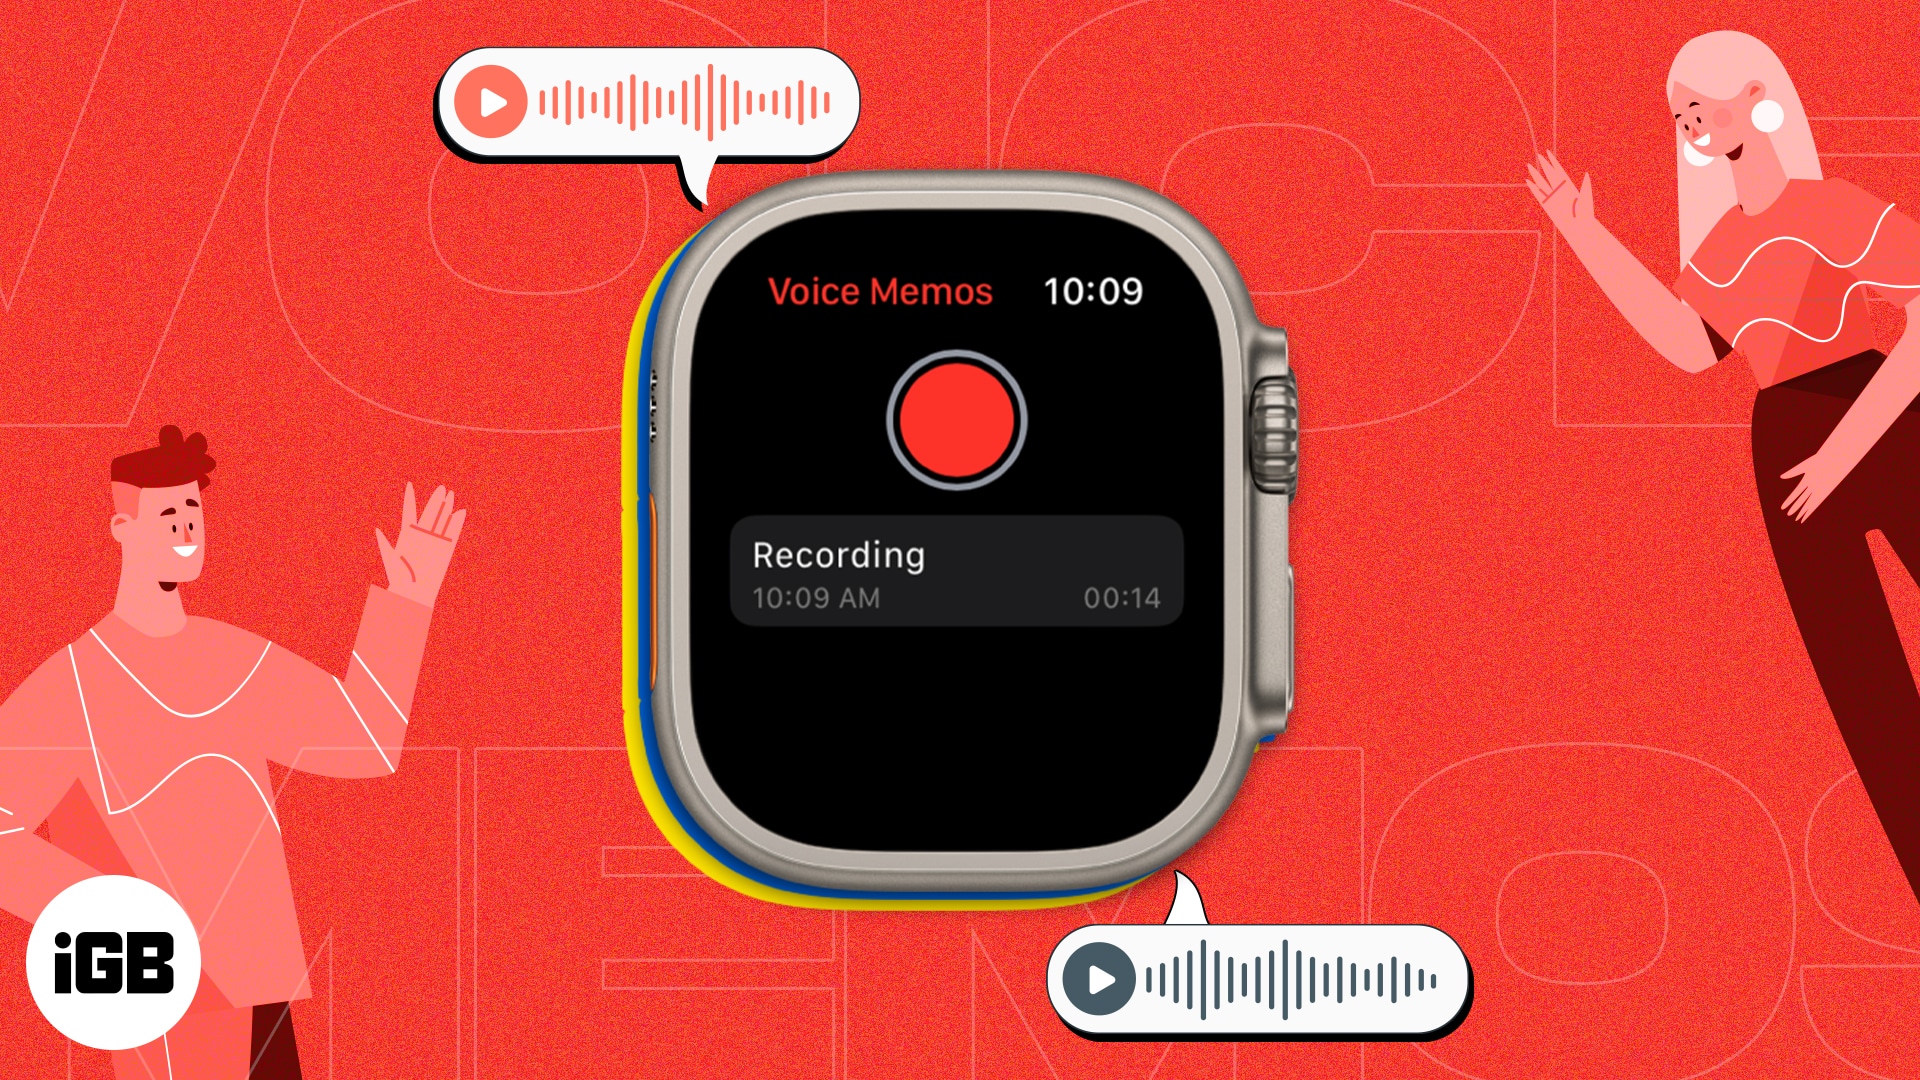 How to record and play voice memos on apple watch